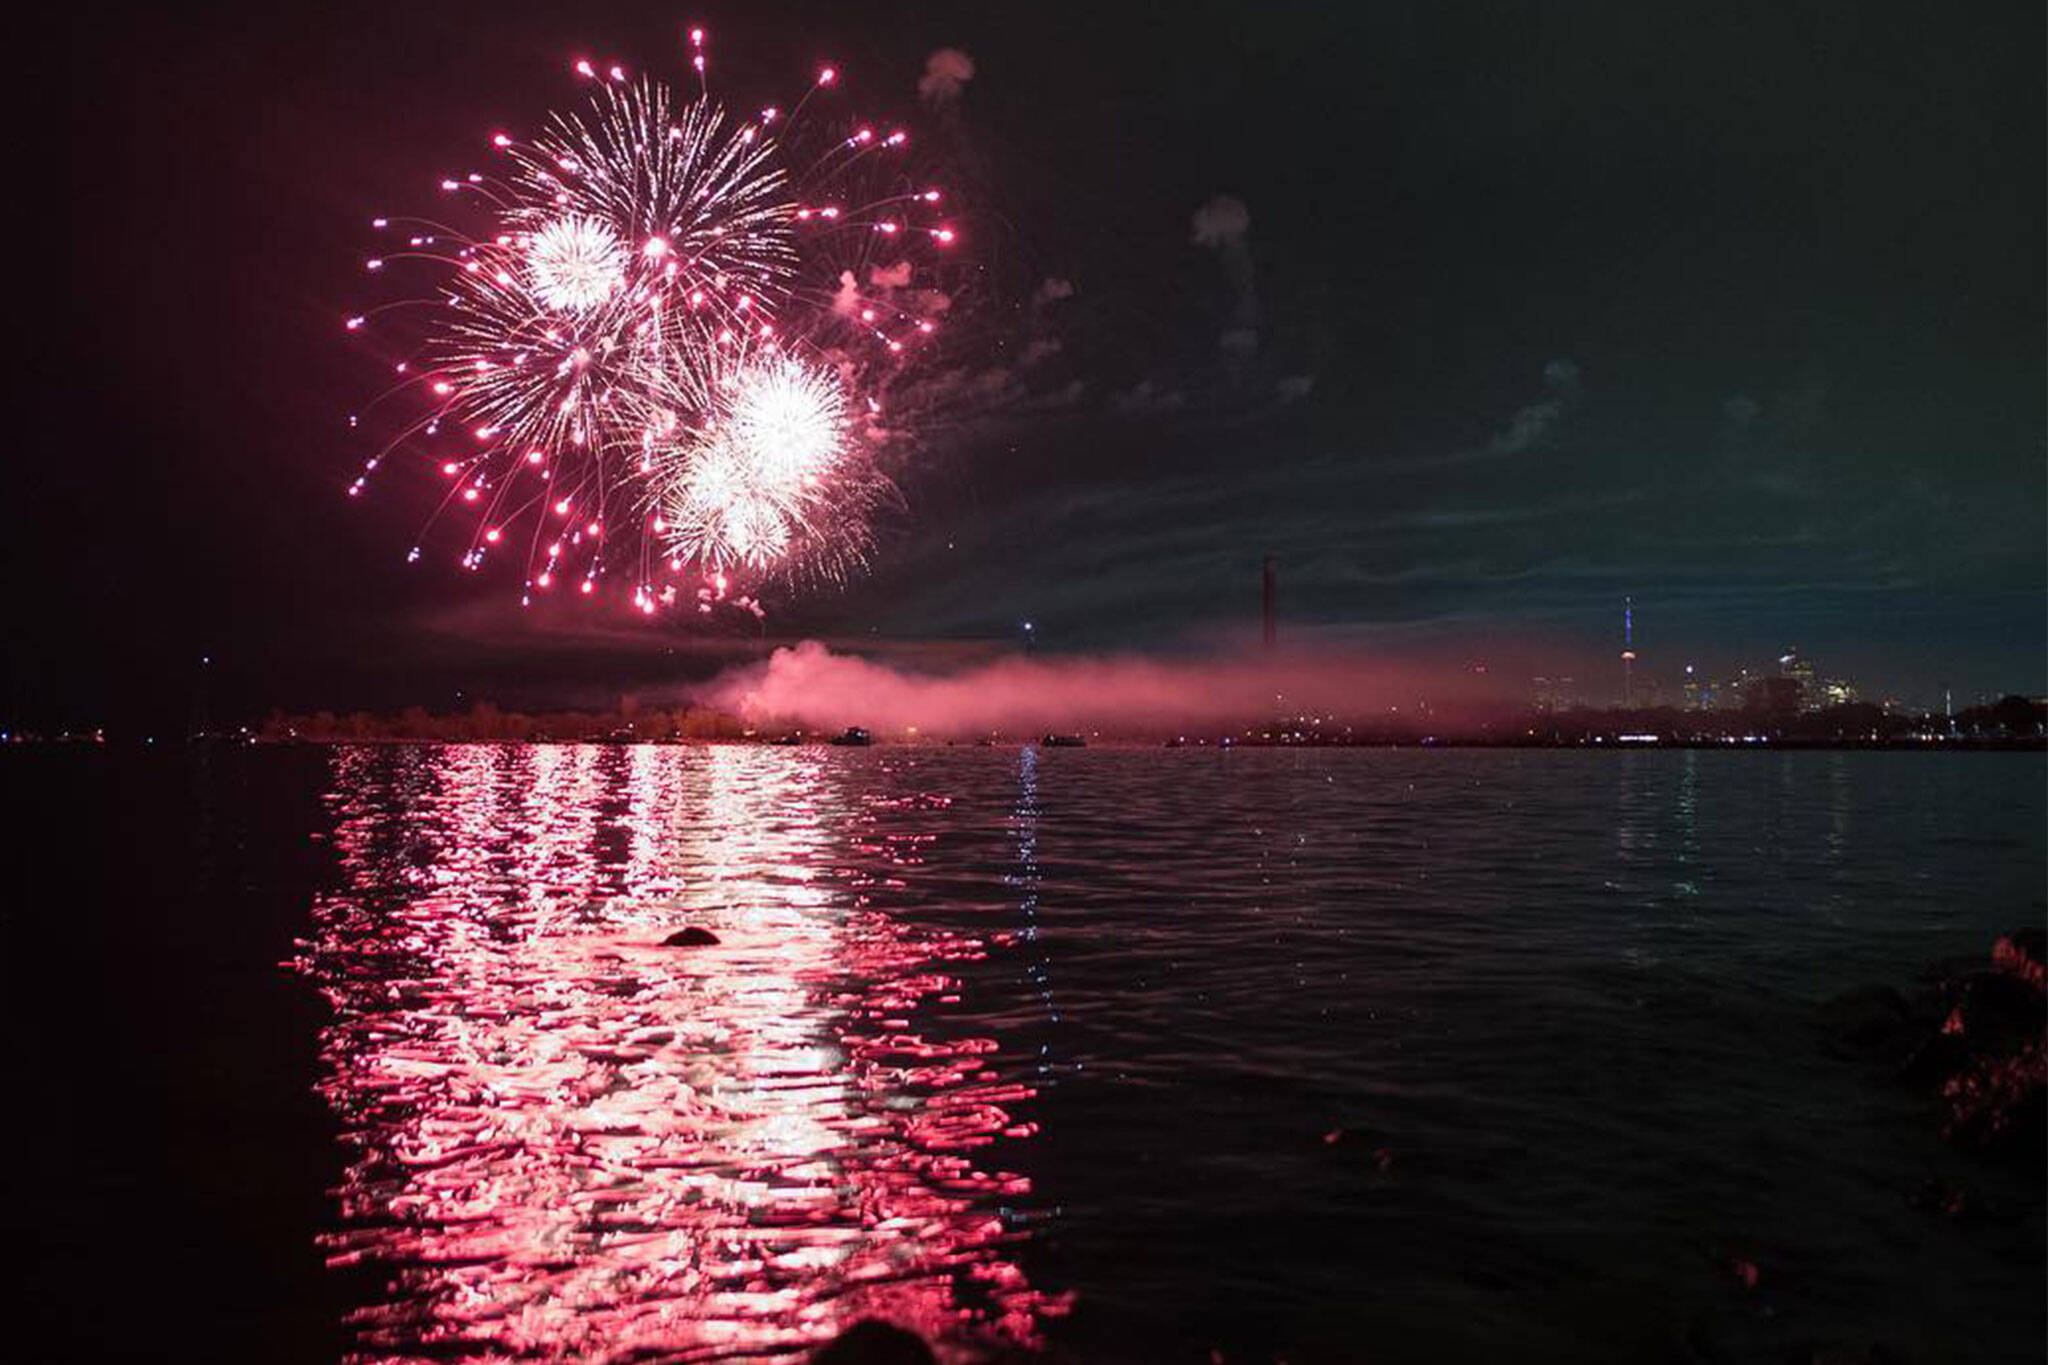 This is what the fireworks looked like in Toronto for Victoria Day